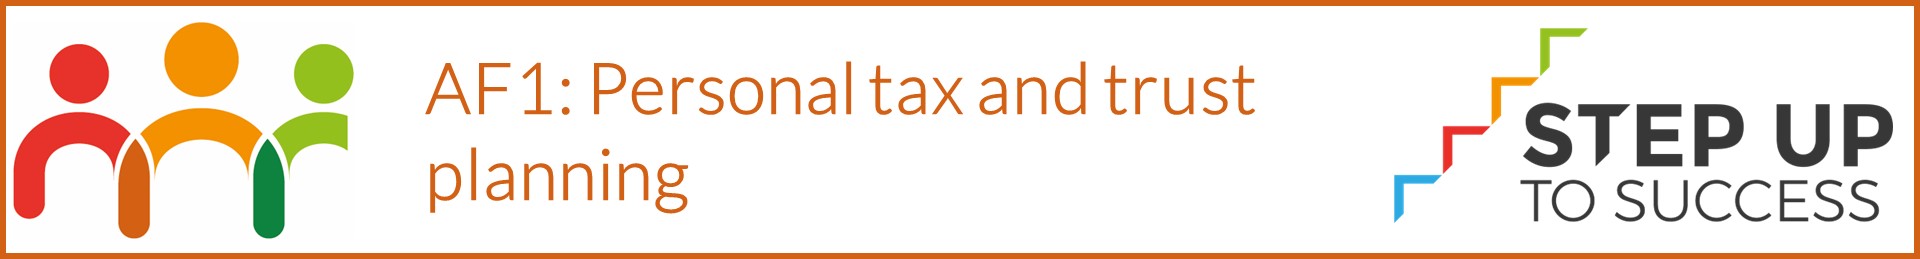 AF1 personal tax and trust planning